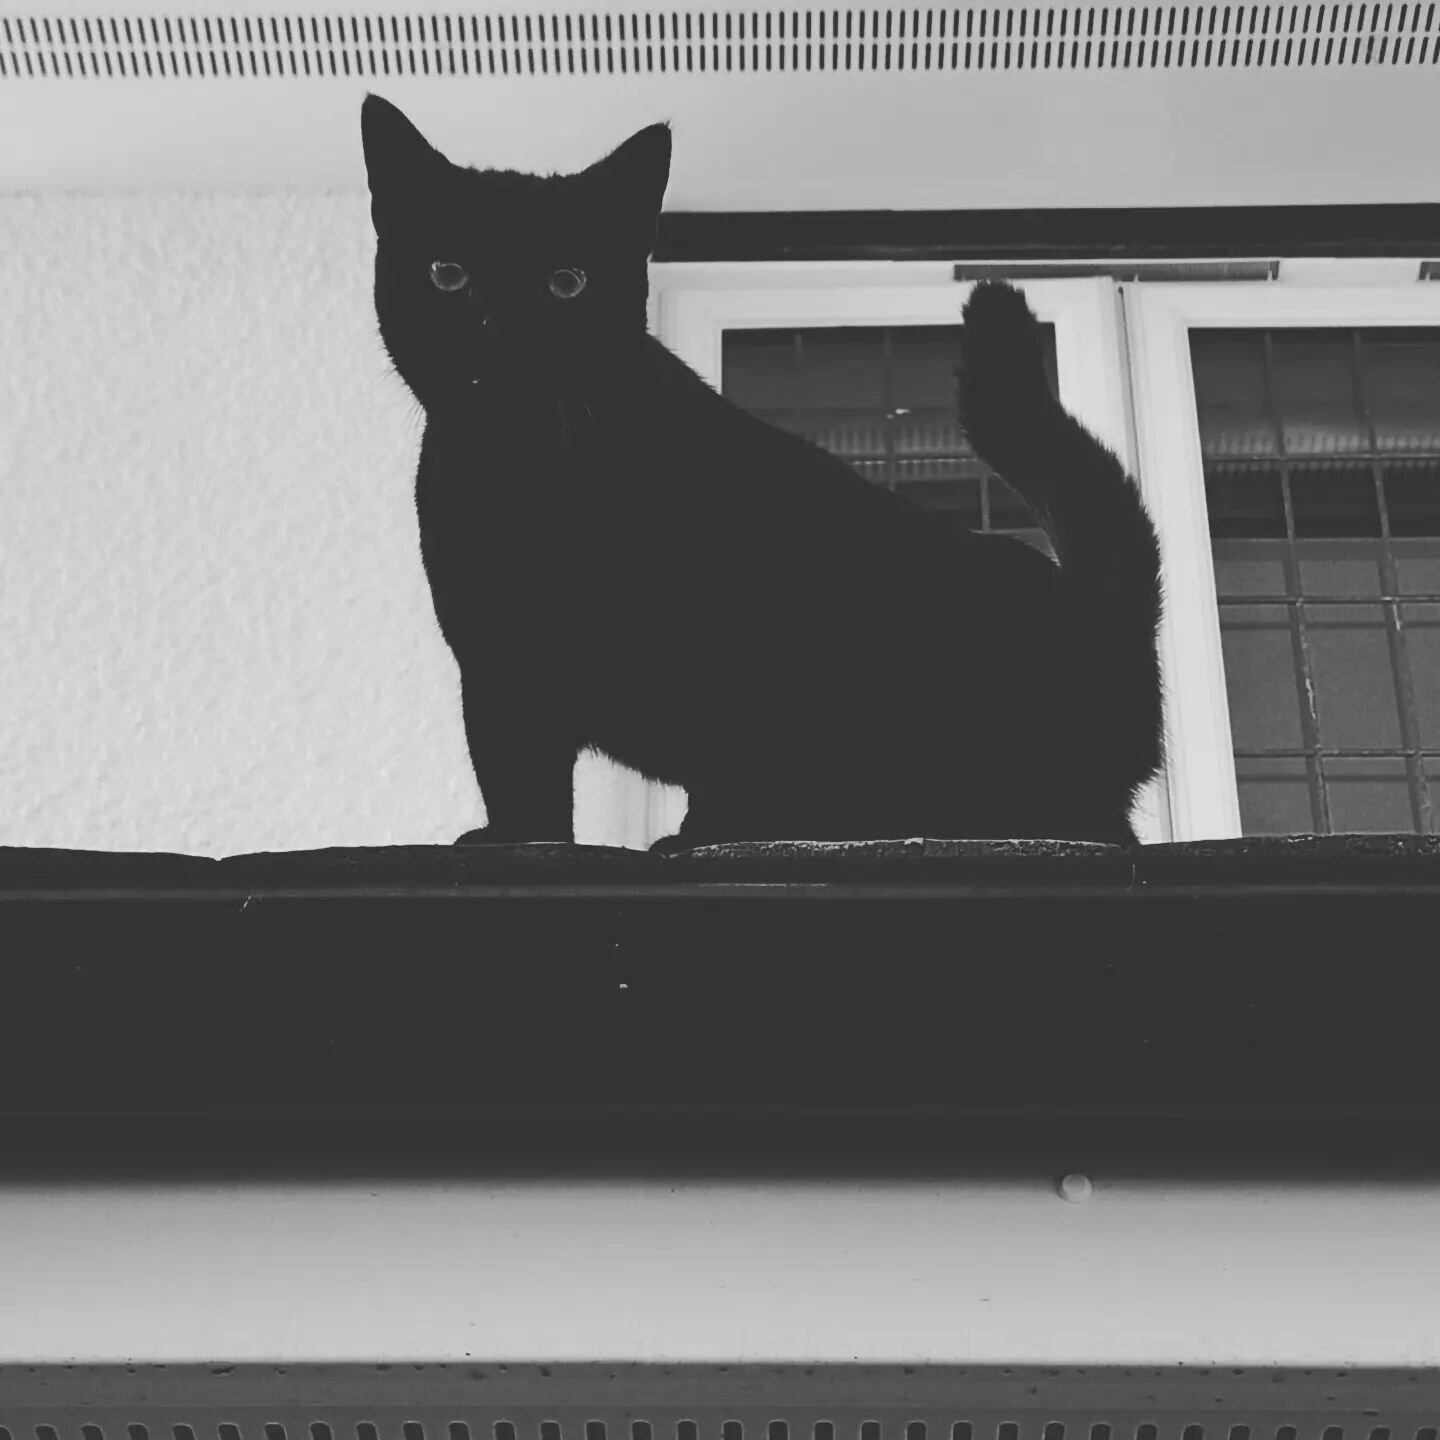 Feeling stuck? Counselling can help. 

Luna found her way onto the garage roof, was miaowing incessantly as she believed she was stuck as the fence was too narrow to jump back onto. I was able to encourage her through a window back to what she sees a